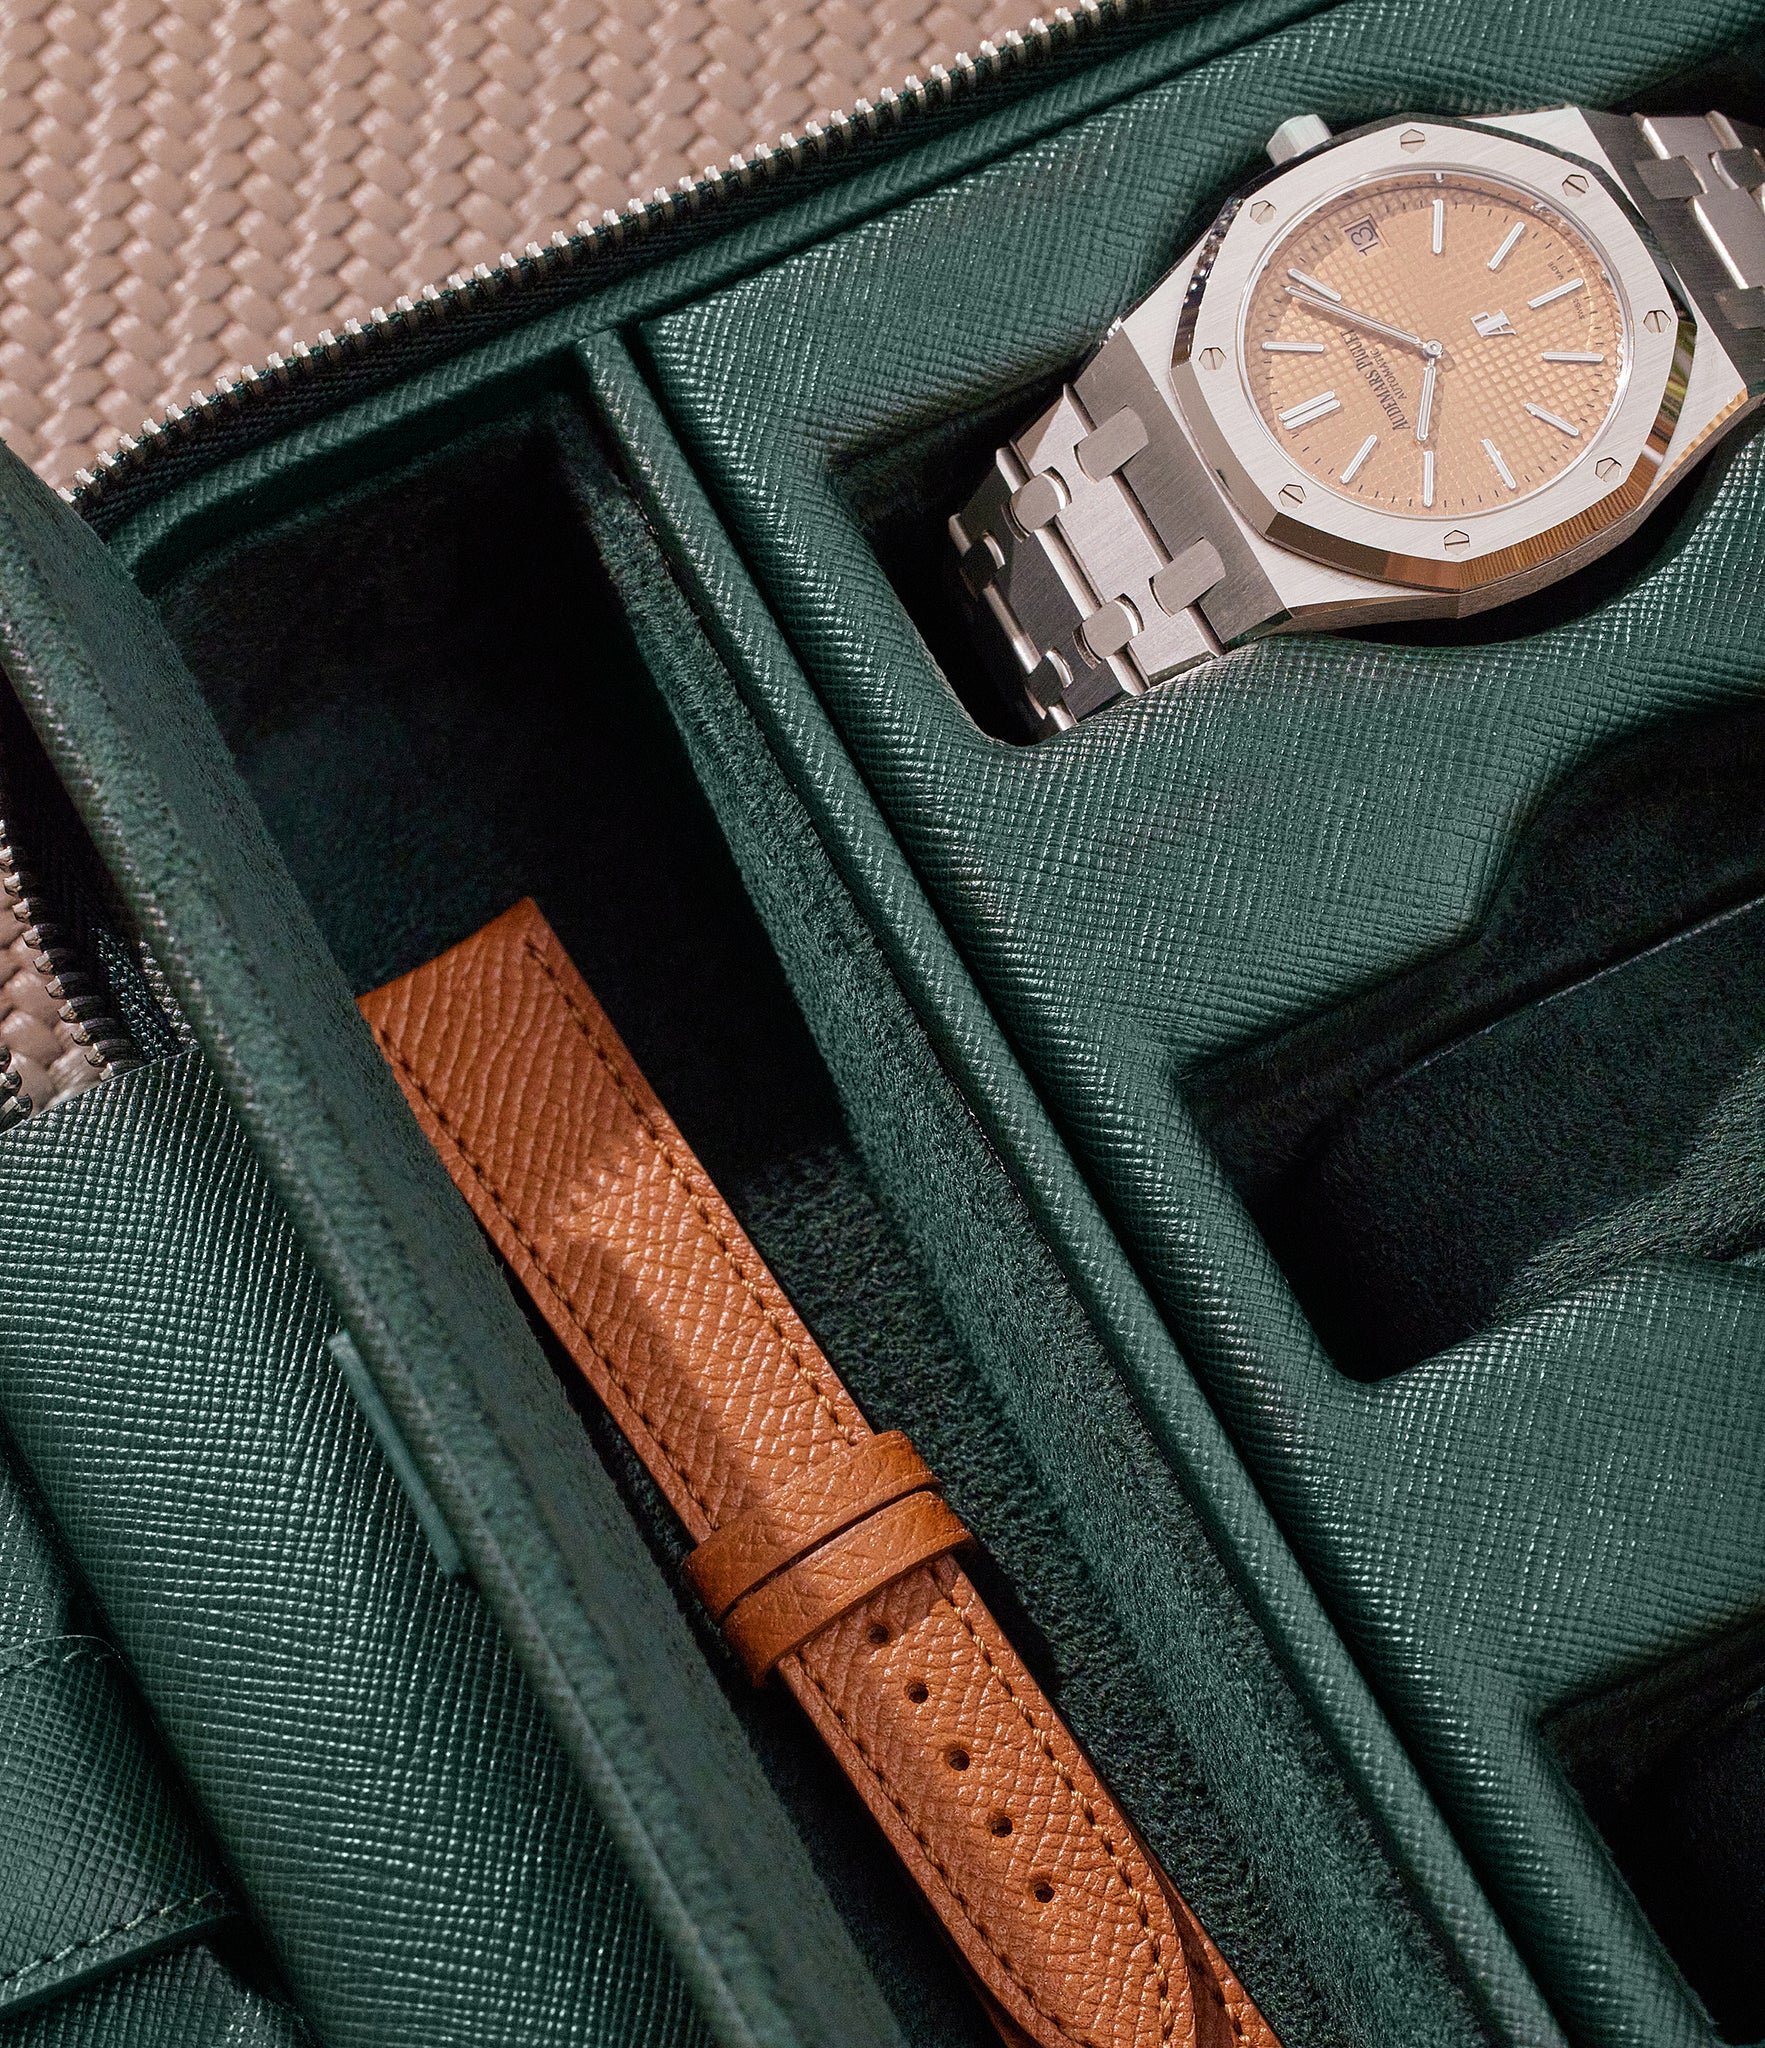 London, six-watch box with compartment, emerald, saffiano leather | Buy at A Collected Man London